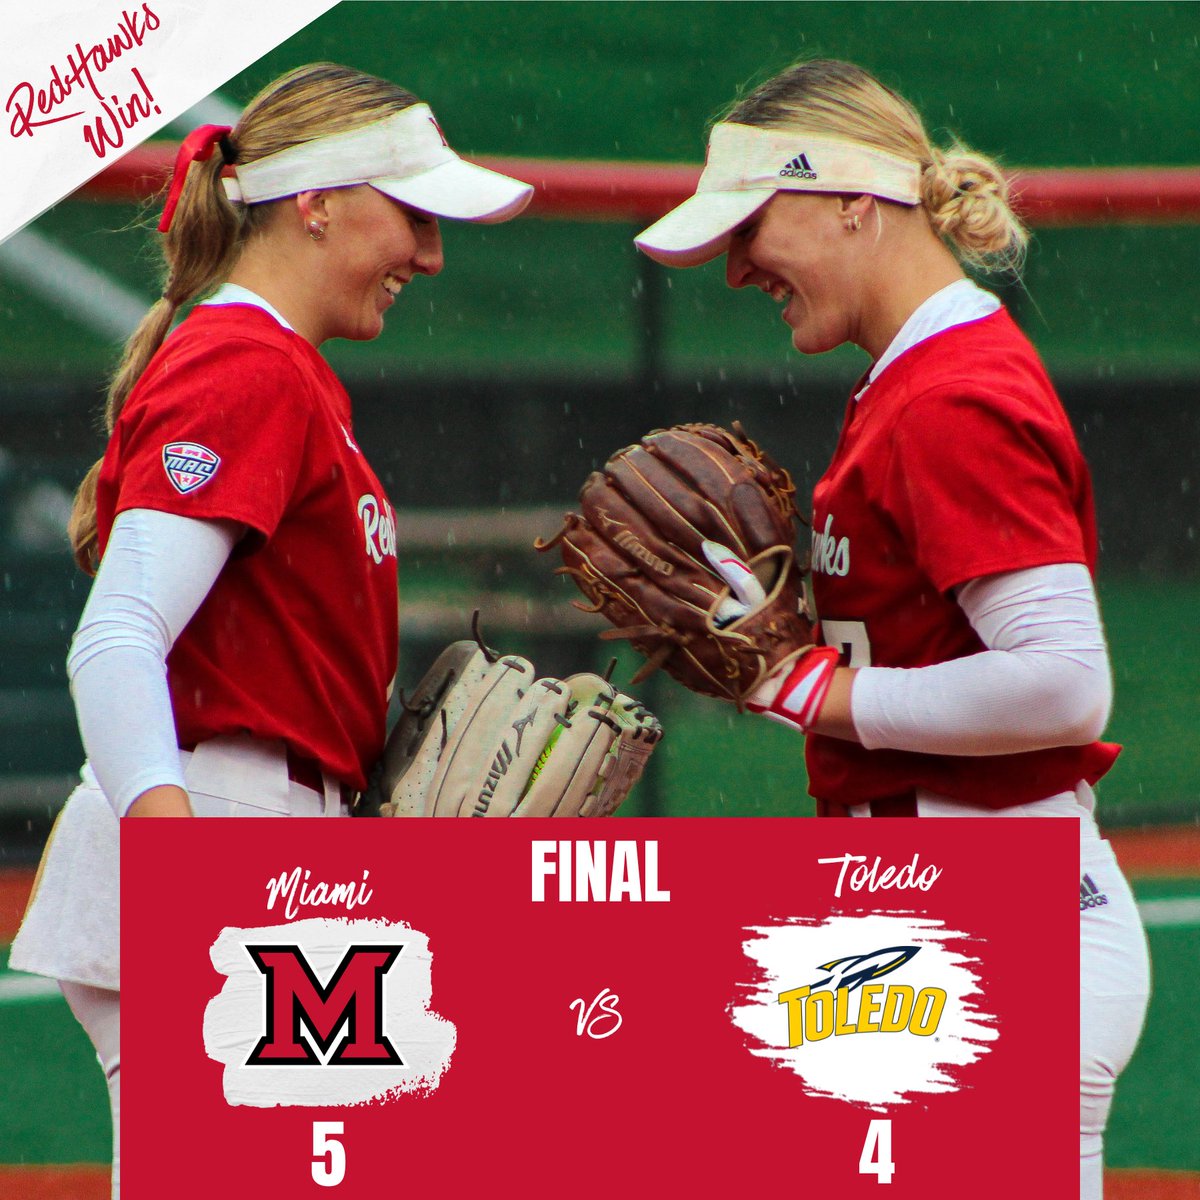 Good things come to those who wait #RiseUpRedHawks 🔴Spaid went 3-for-4 at the plate. Parks went 2-for-3. 🔴Bewick knocked in three RBI including a two-run homer and the game-winning sac fly. 🔴Madilyn Reeves pitched the complete game and got the win.